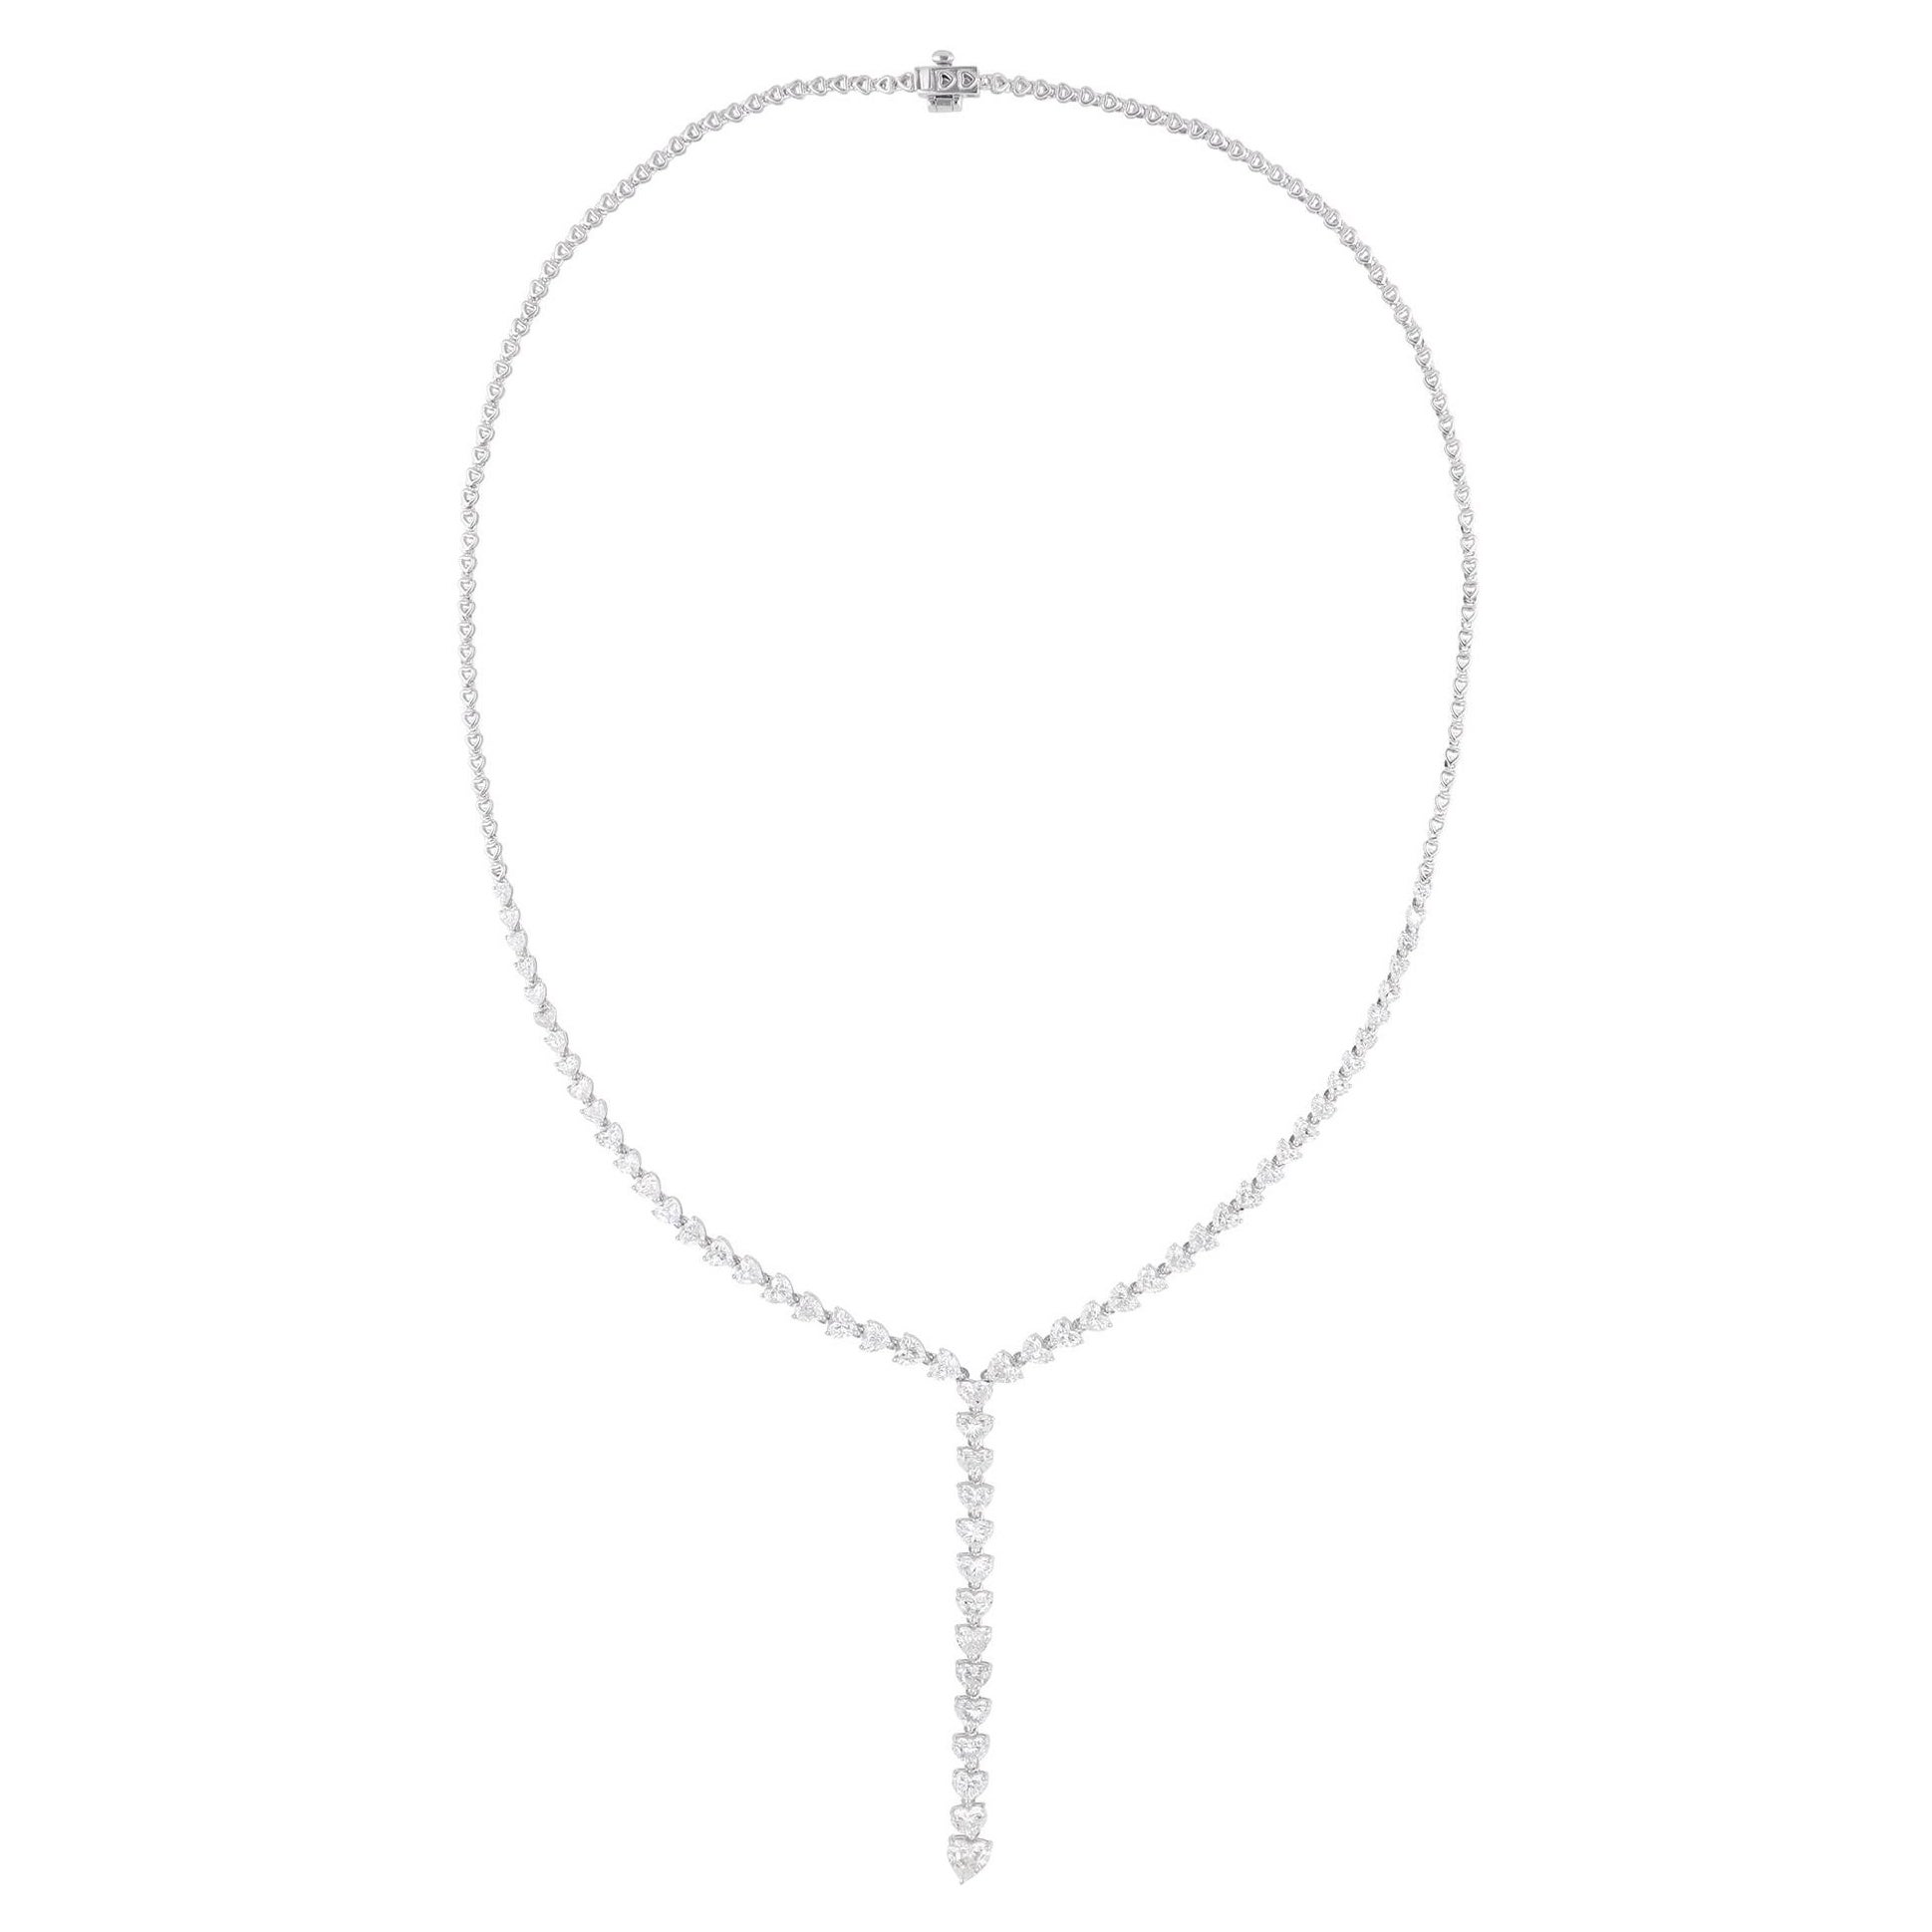 Real 6.84 Carat Heart Shape Diamond Lariat Necklace 14 Karat White Gold Jewelry For Sale